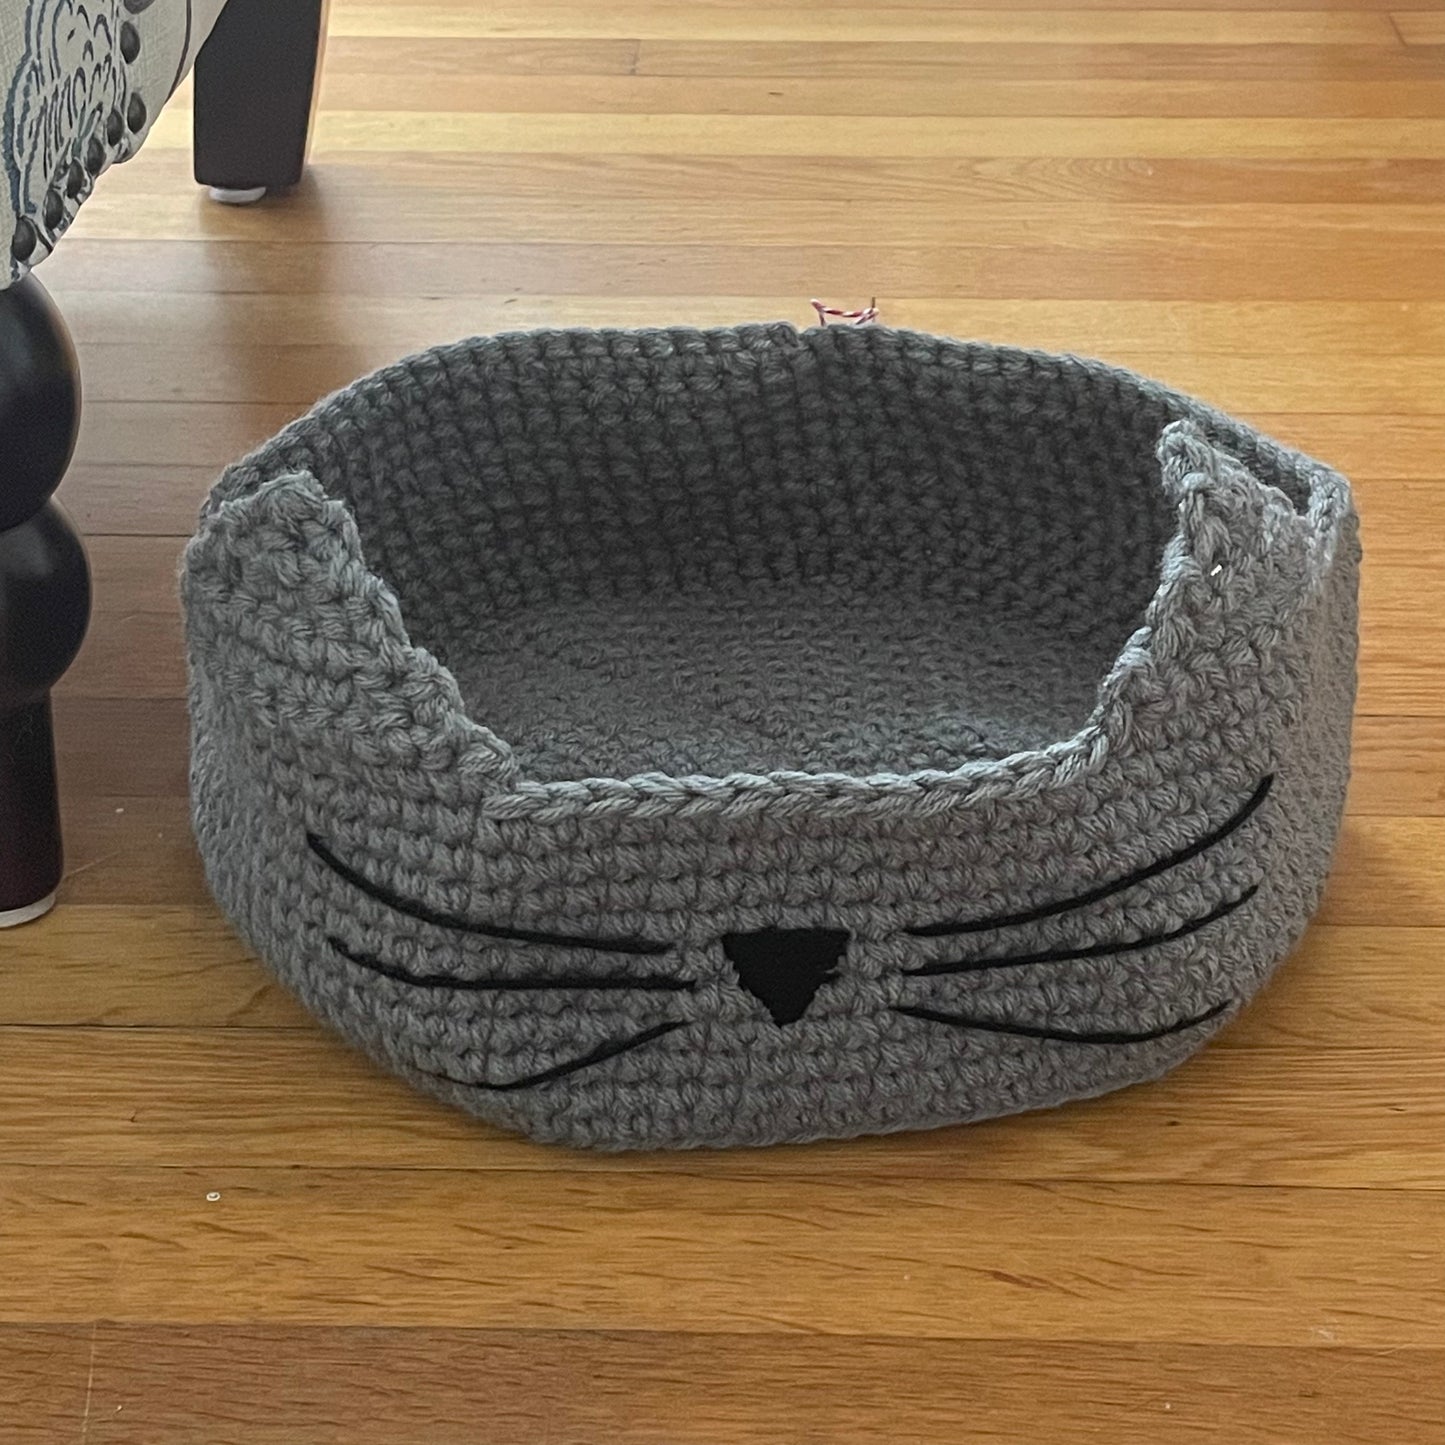 Small Cat Bed in Gray & Black Nose 11.5" Hand Crocheted Pet Furbaby Gift Cat Mom Dad